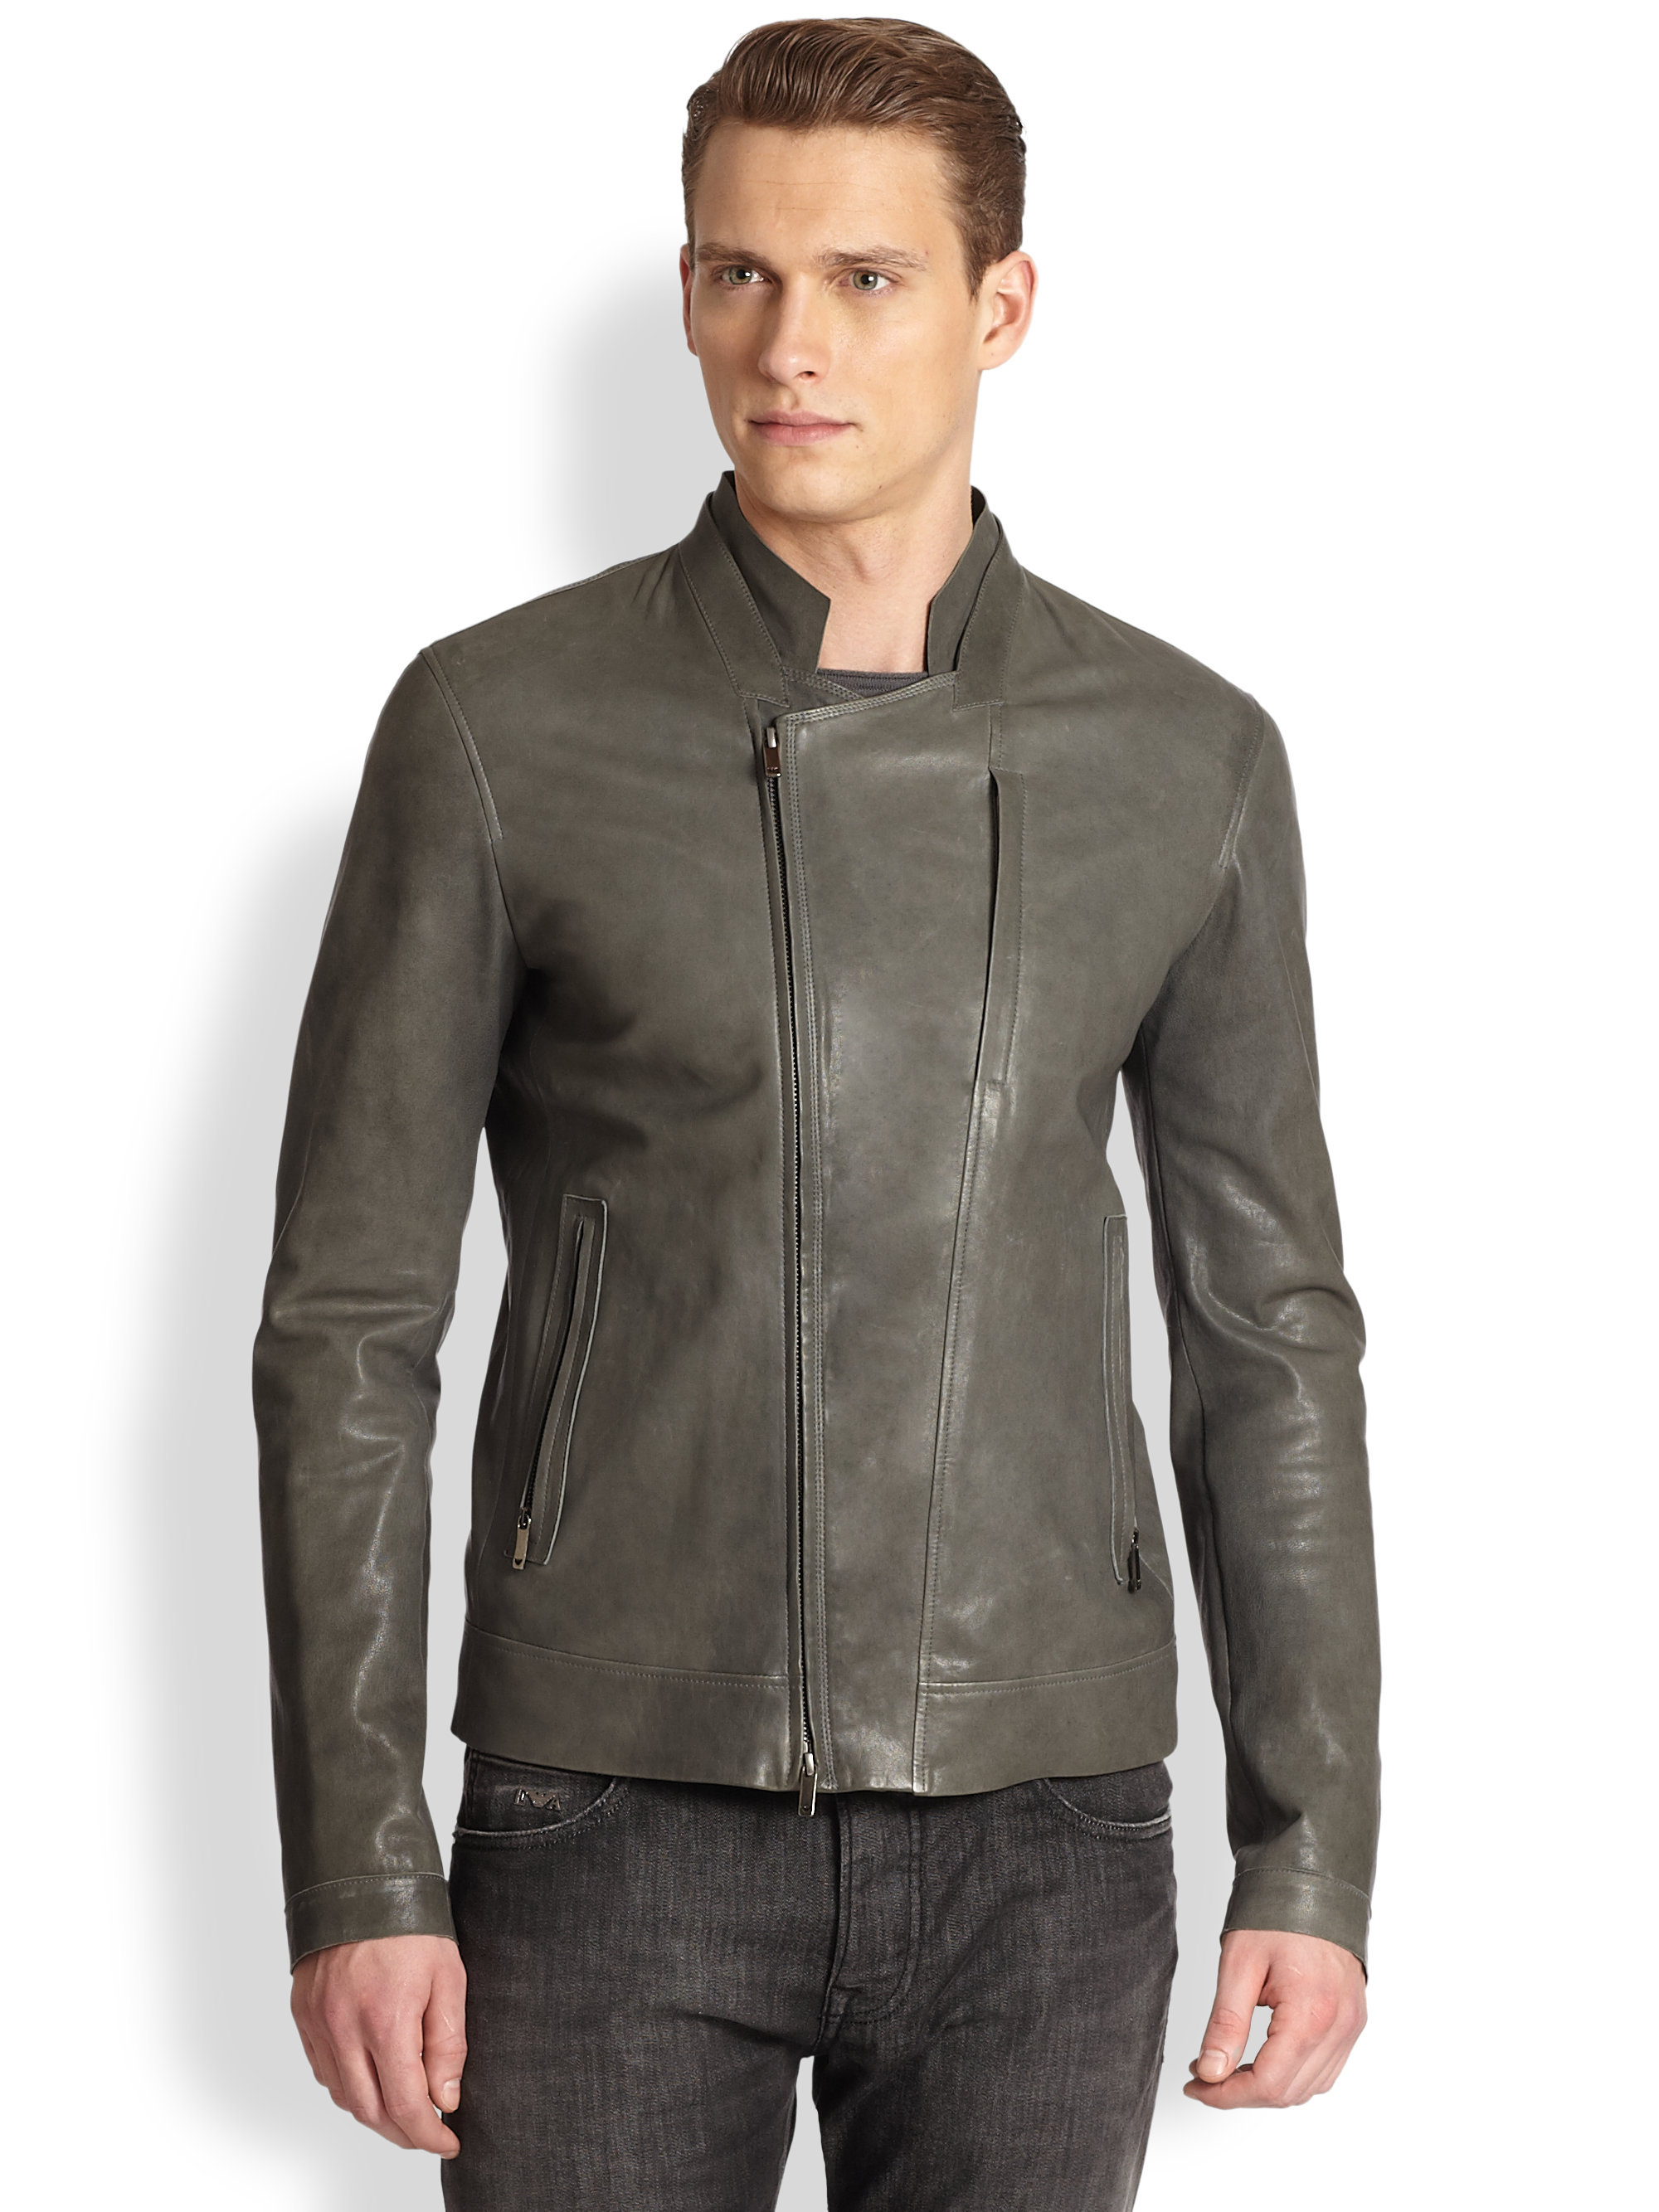 Emporio Armani  Asymmetrical Leather Jacket Product 1 16415318 1 193263669 Normal 